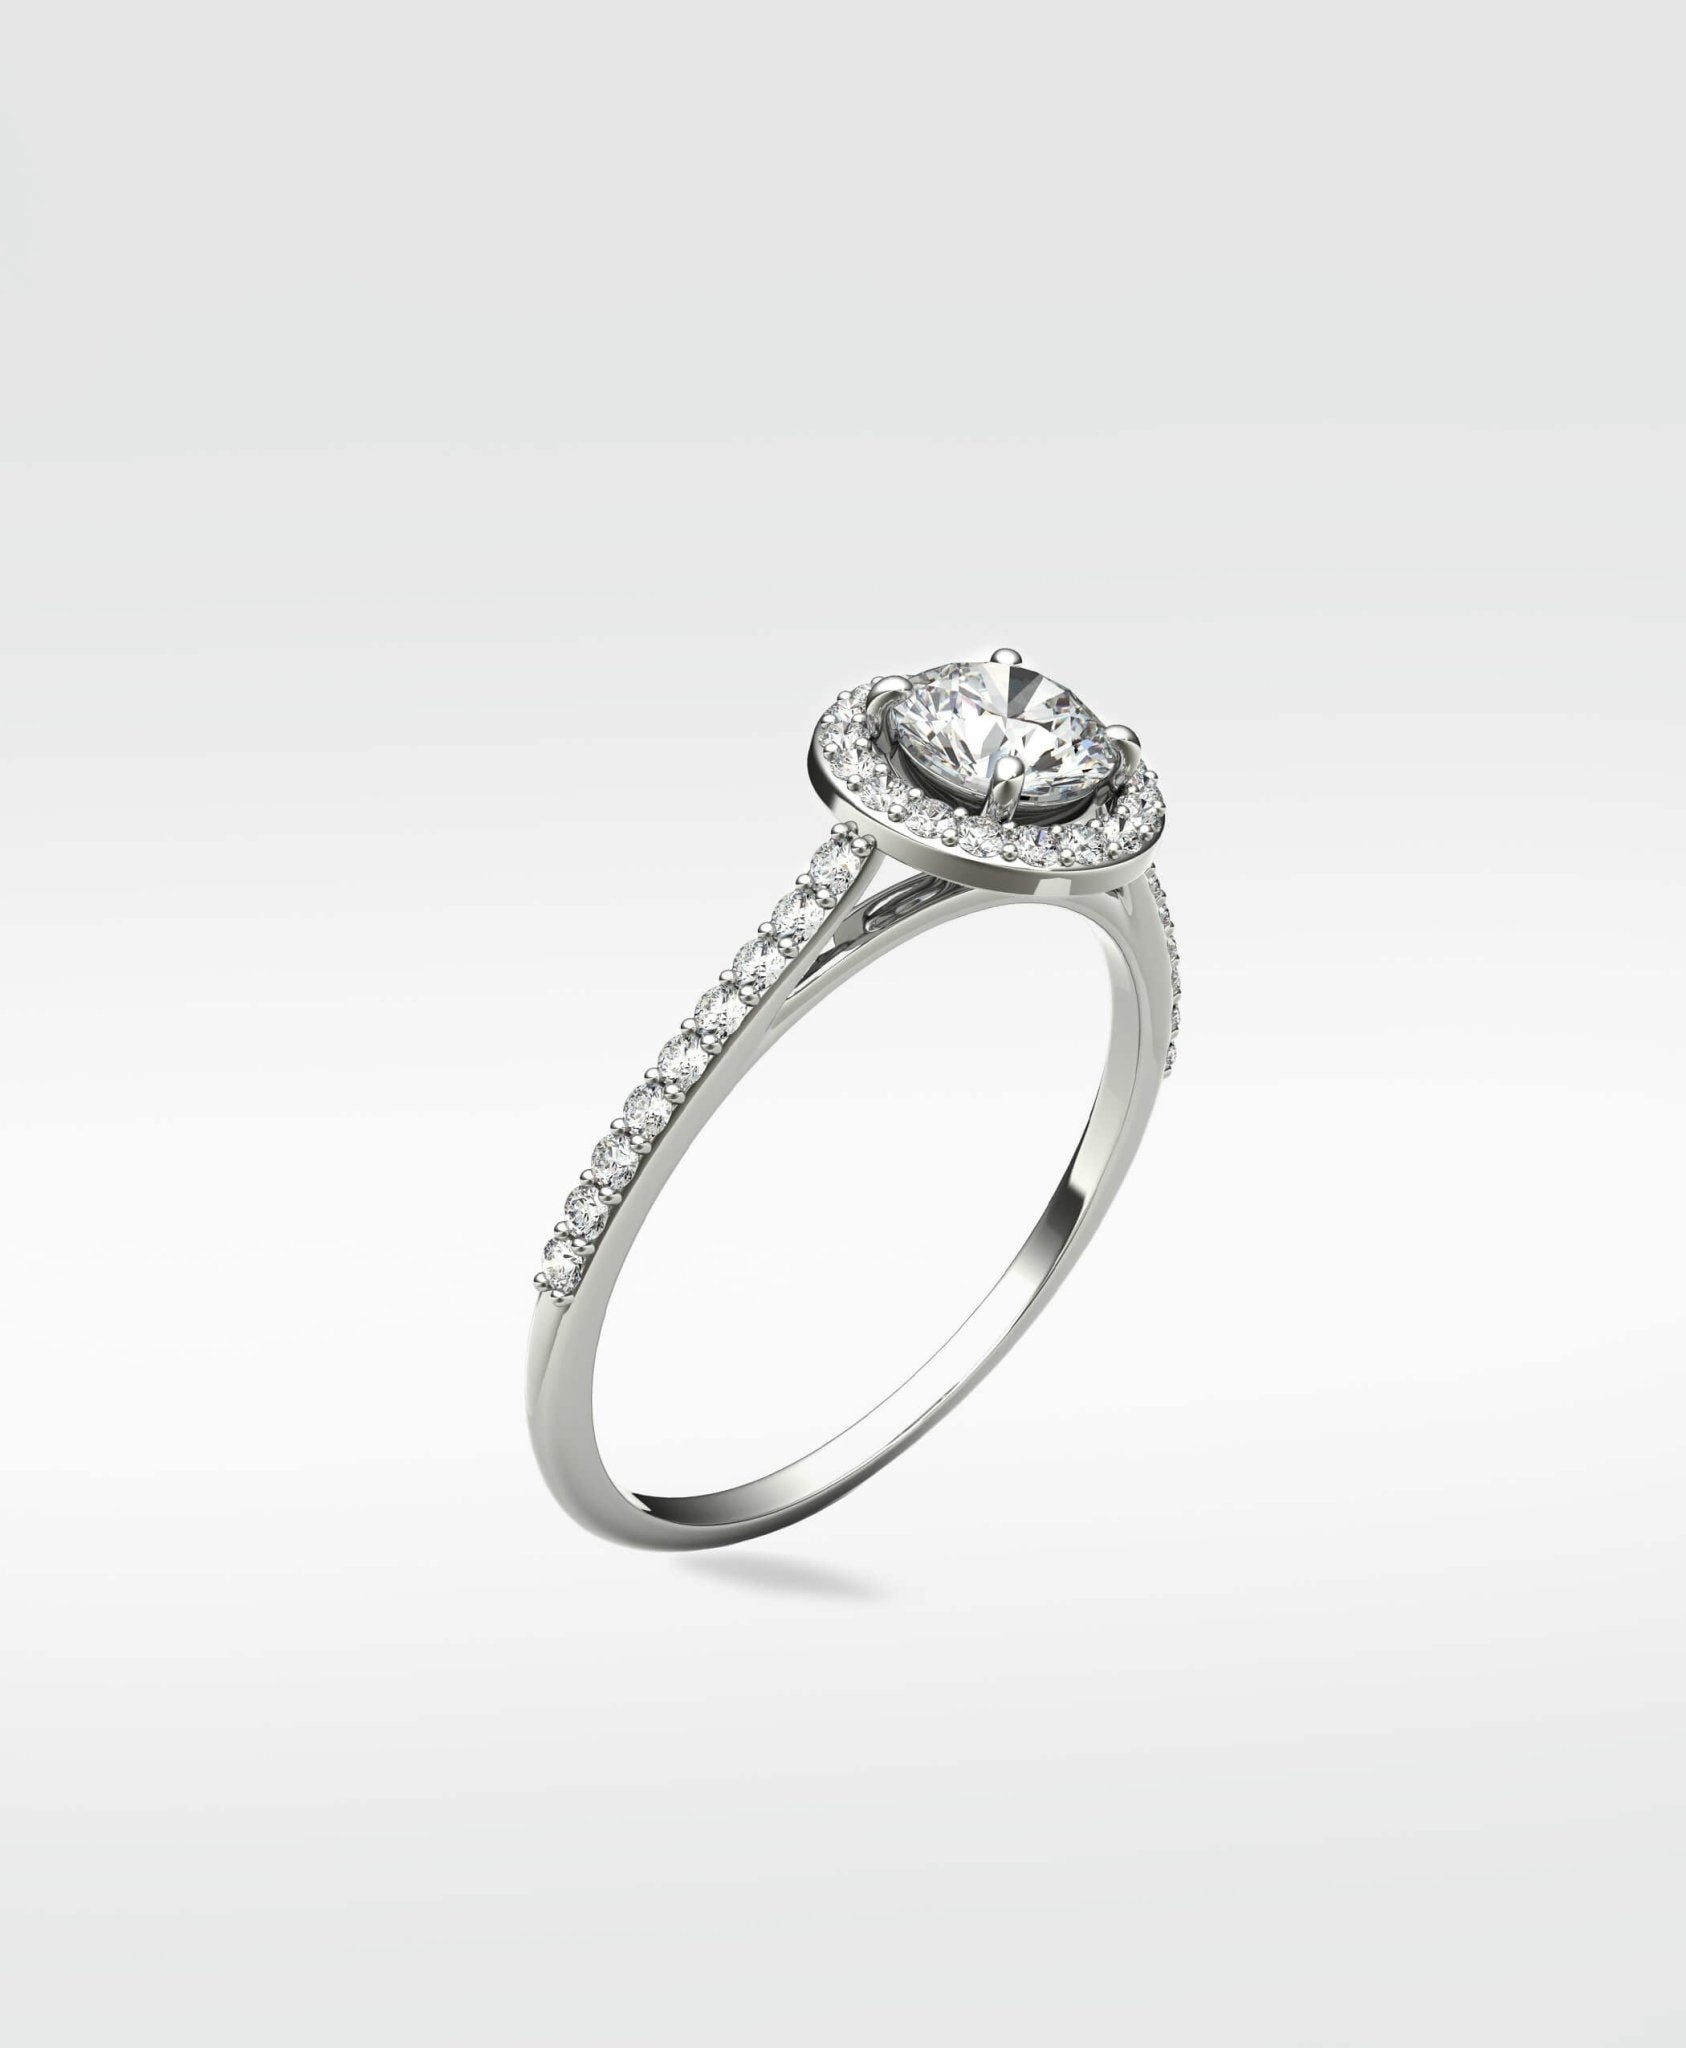 Holly Diamond Engagement Ring - Lark and Berry